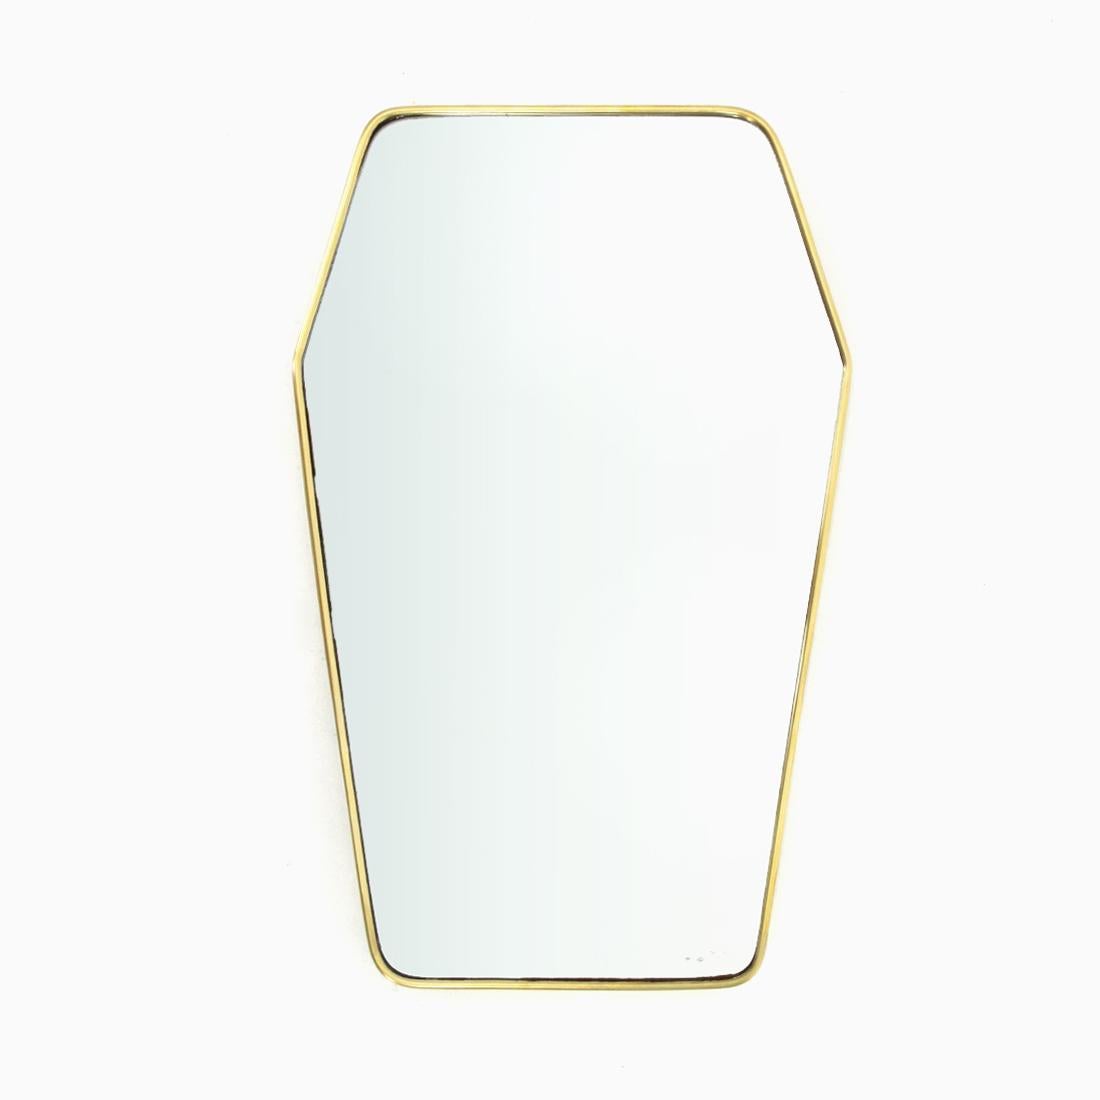 Mirror of Italian manufacture produced in the 1950s.
Wooden structure.
Brass frame.
Mirrored glass.
Structure in good condition, some marks and halos on the mirror.

Dimensions: Length 38 cm, depth 2.5 cm, height 60 cm.